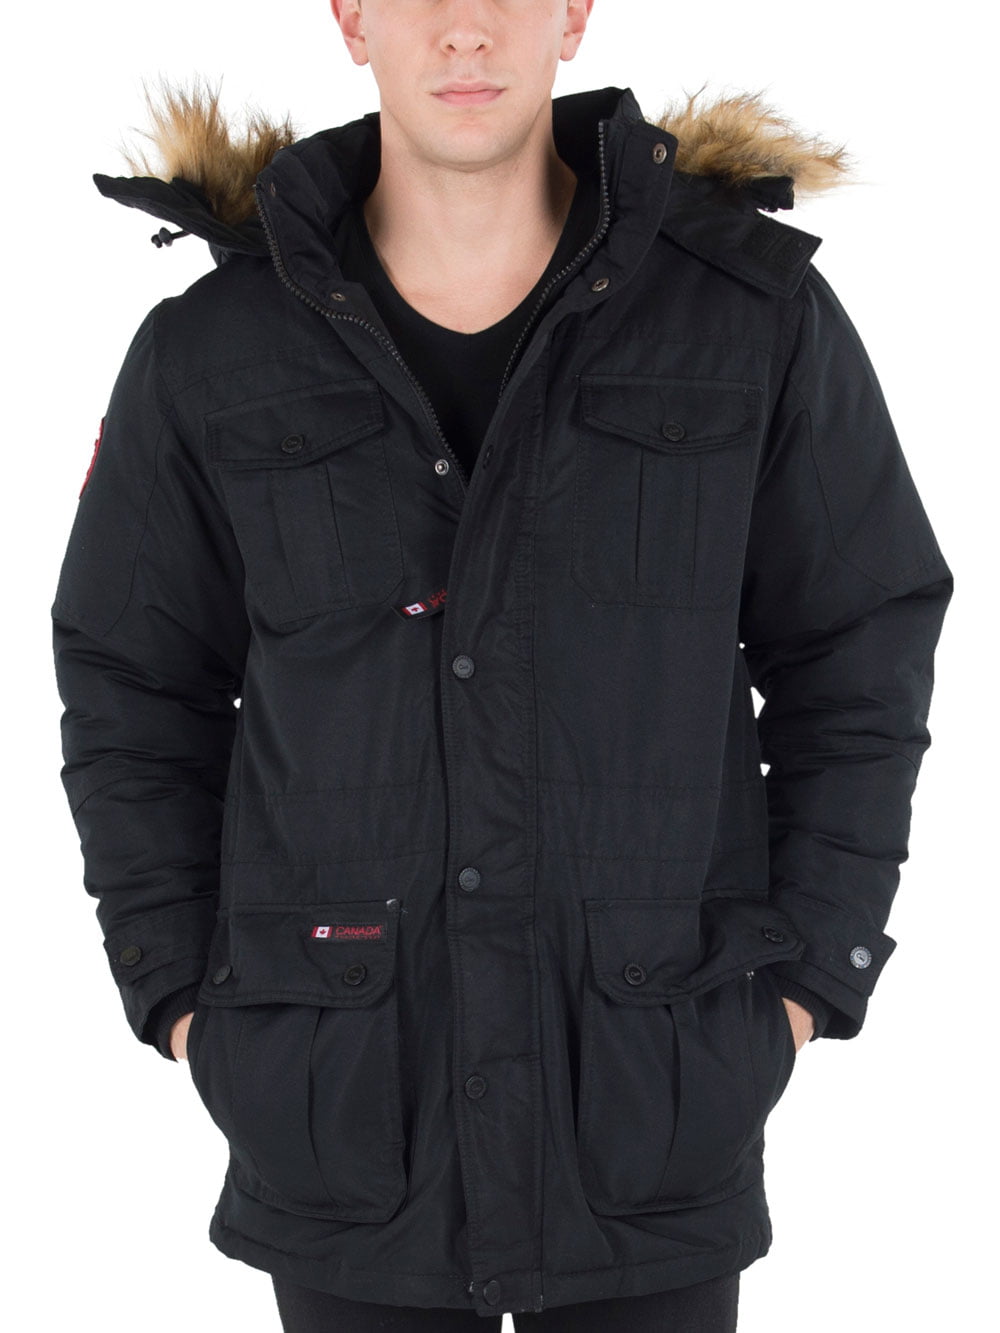 Canada Weather Gear Men's Insulated Jacket 